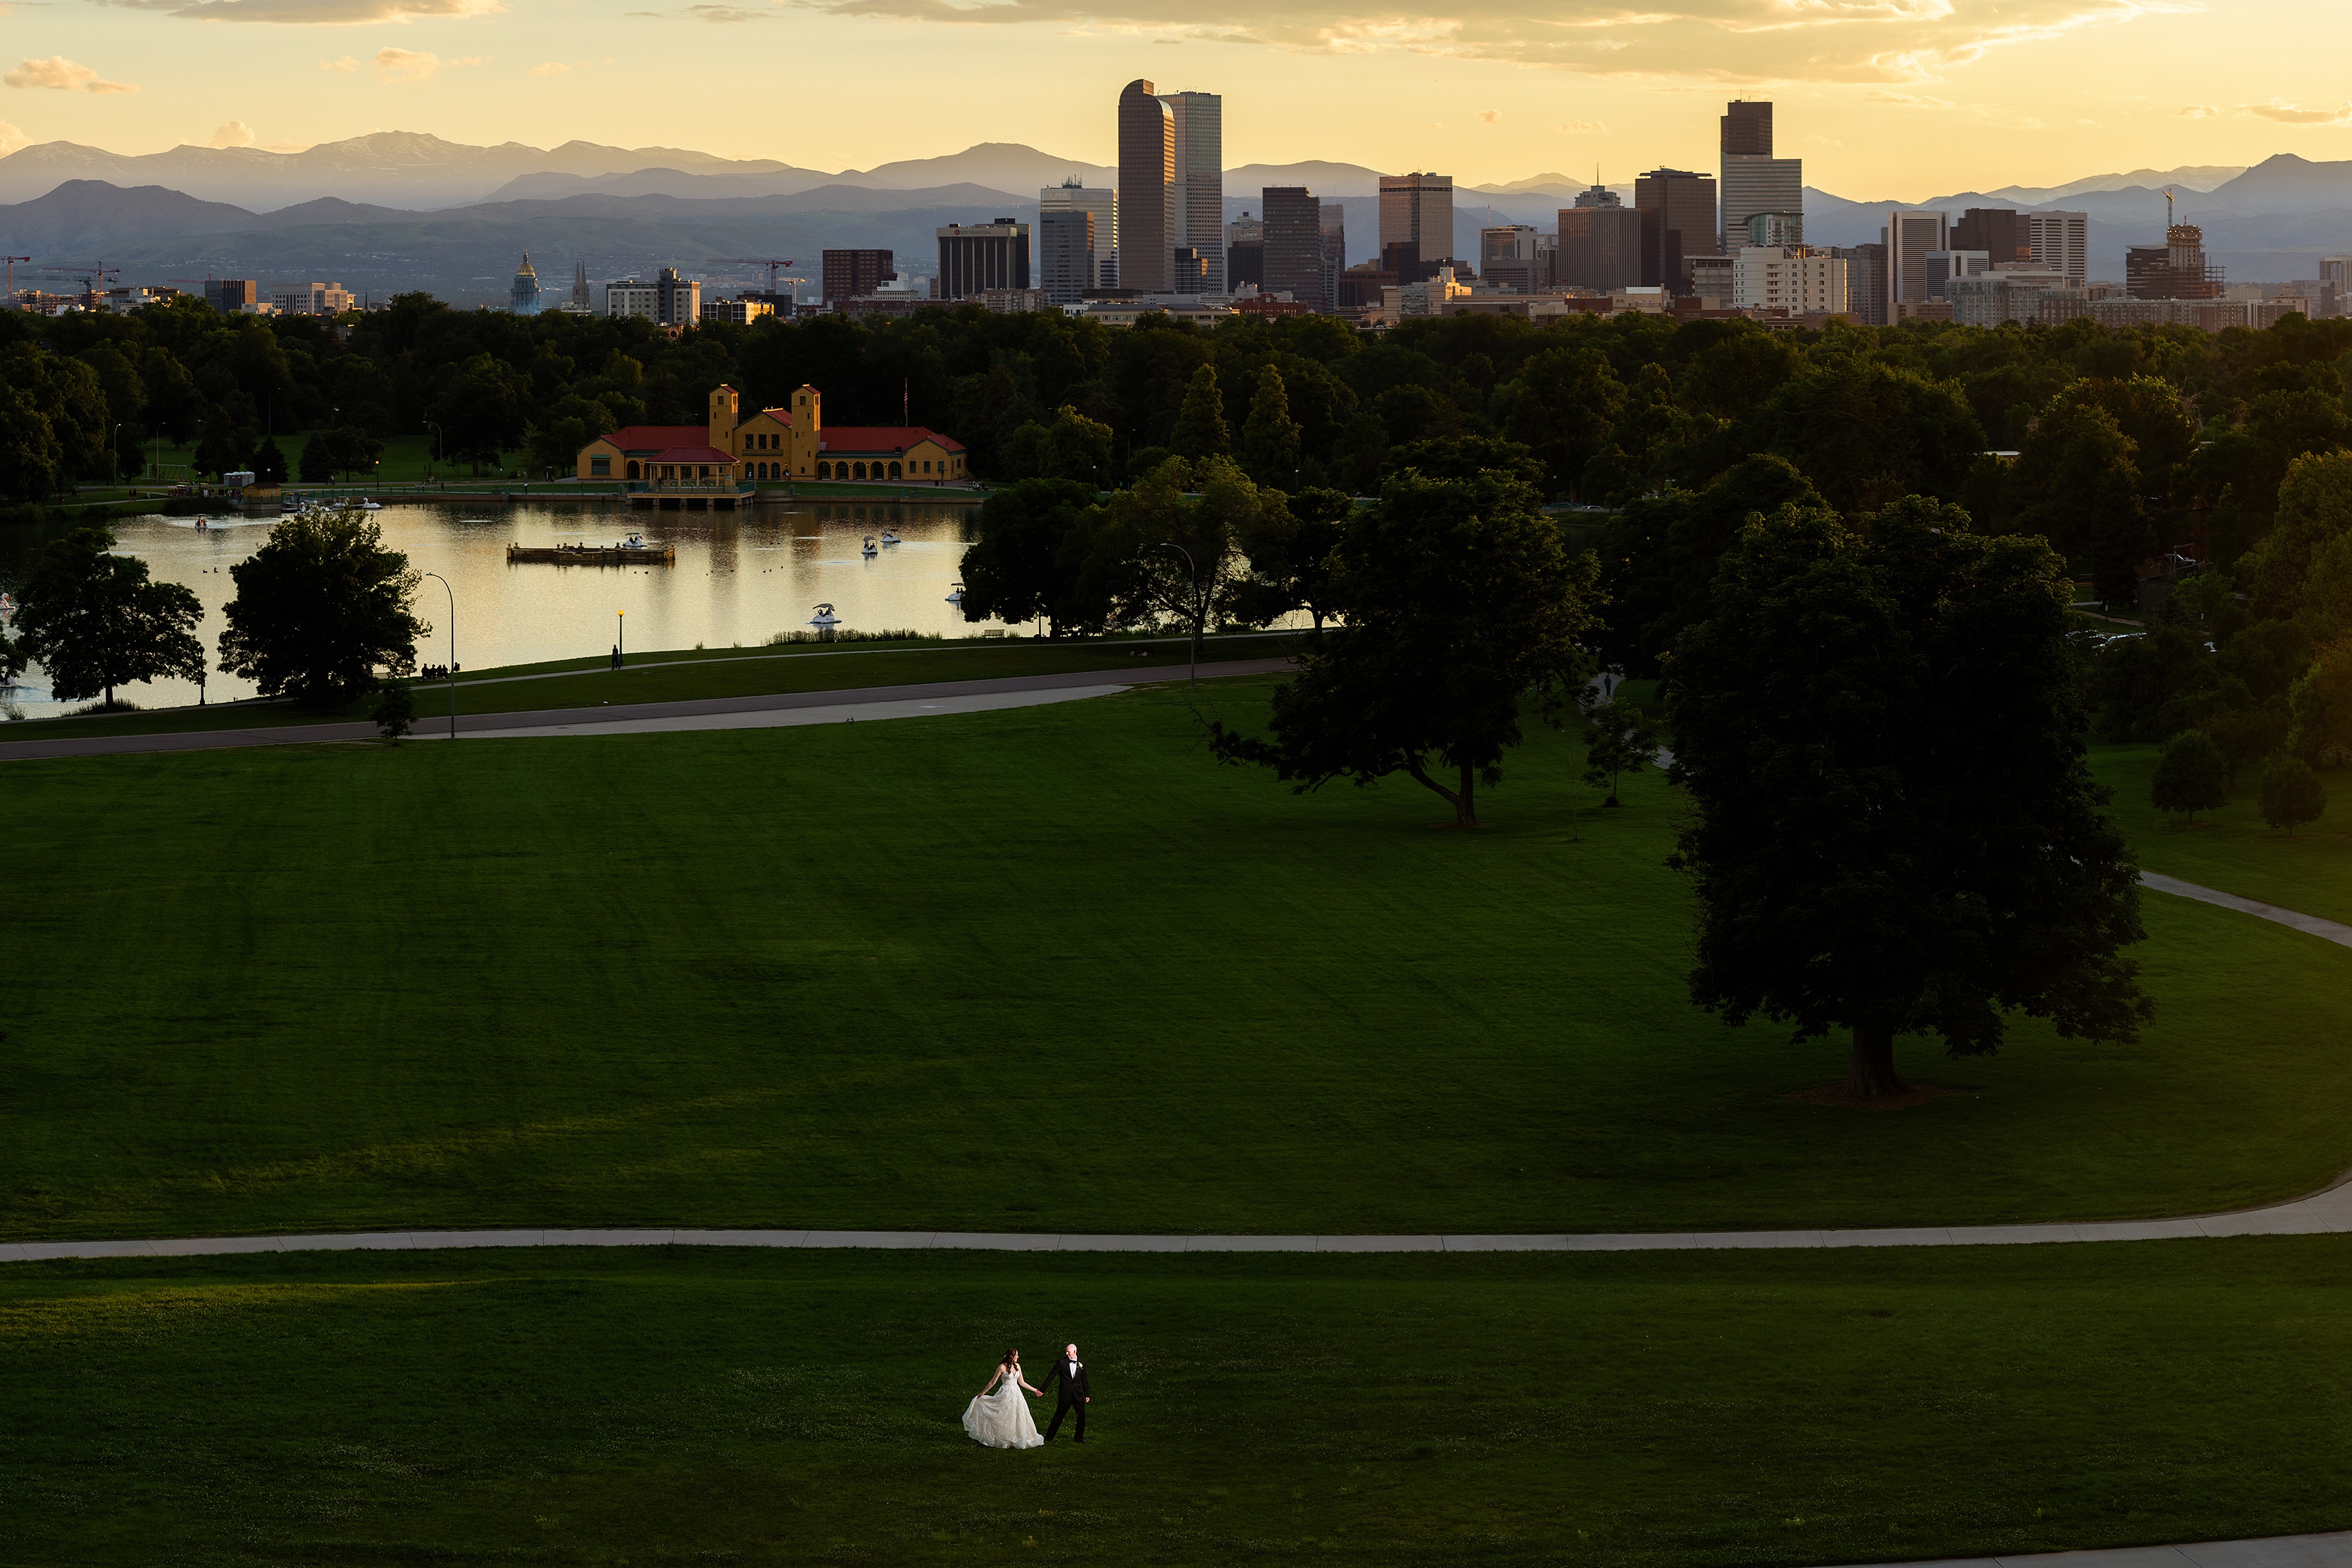 The bride and groom walk together in the grass in City Park outside the Denver Museum of Nature and Science as the sun sets behind the skyline and mountains